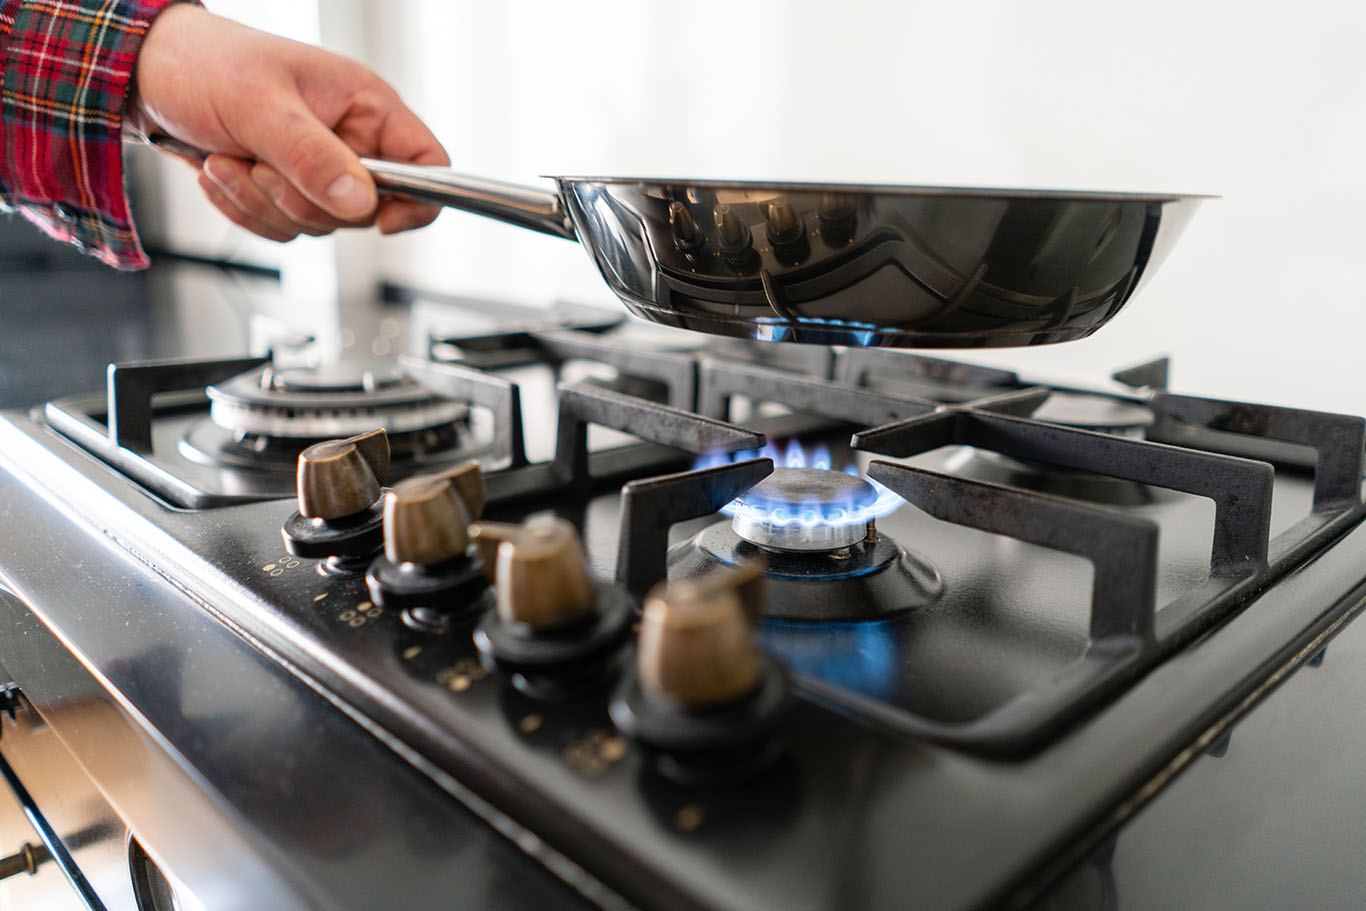 A man cooks in a frying pan, puts it on the stove.